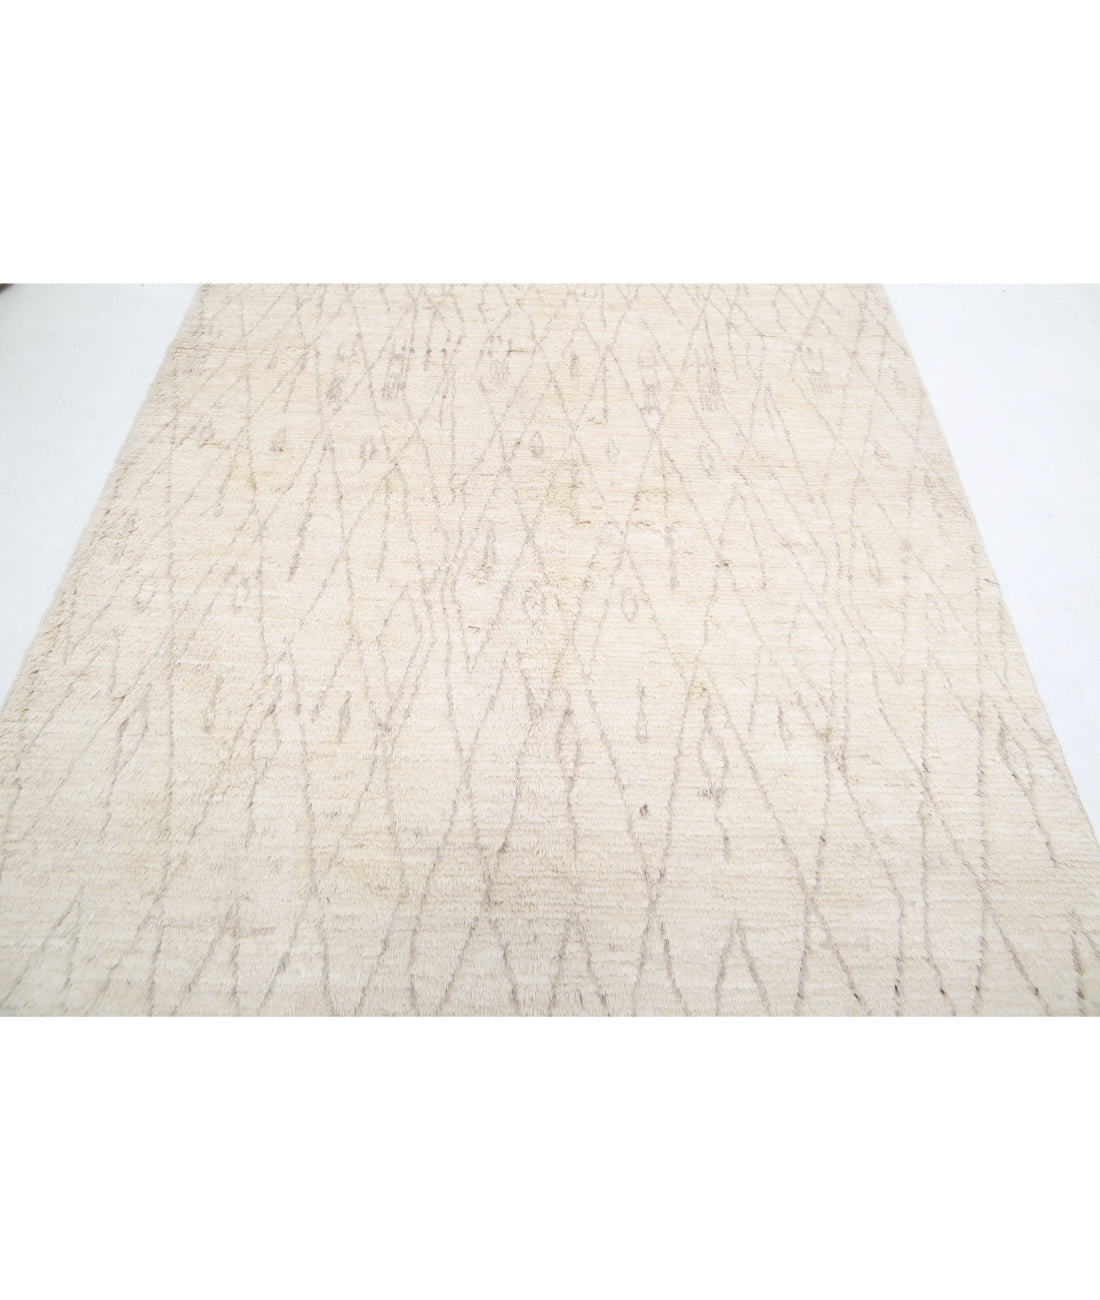 Hand Knotted Tribal Moroccan Wool Rug - 6'0'' x 9'0'' 6'0'' x 9'0'' (180 X 270) / Ivory / Taupe